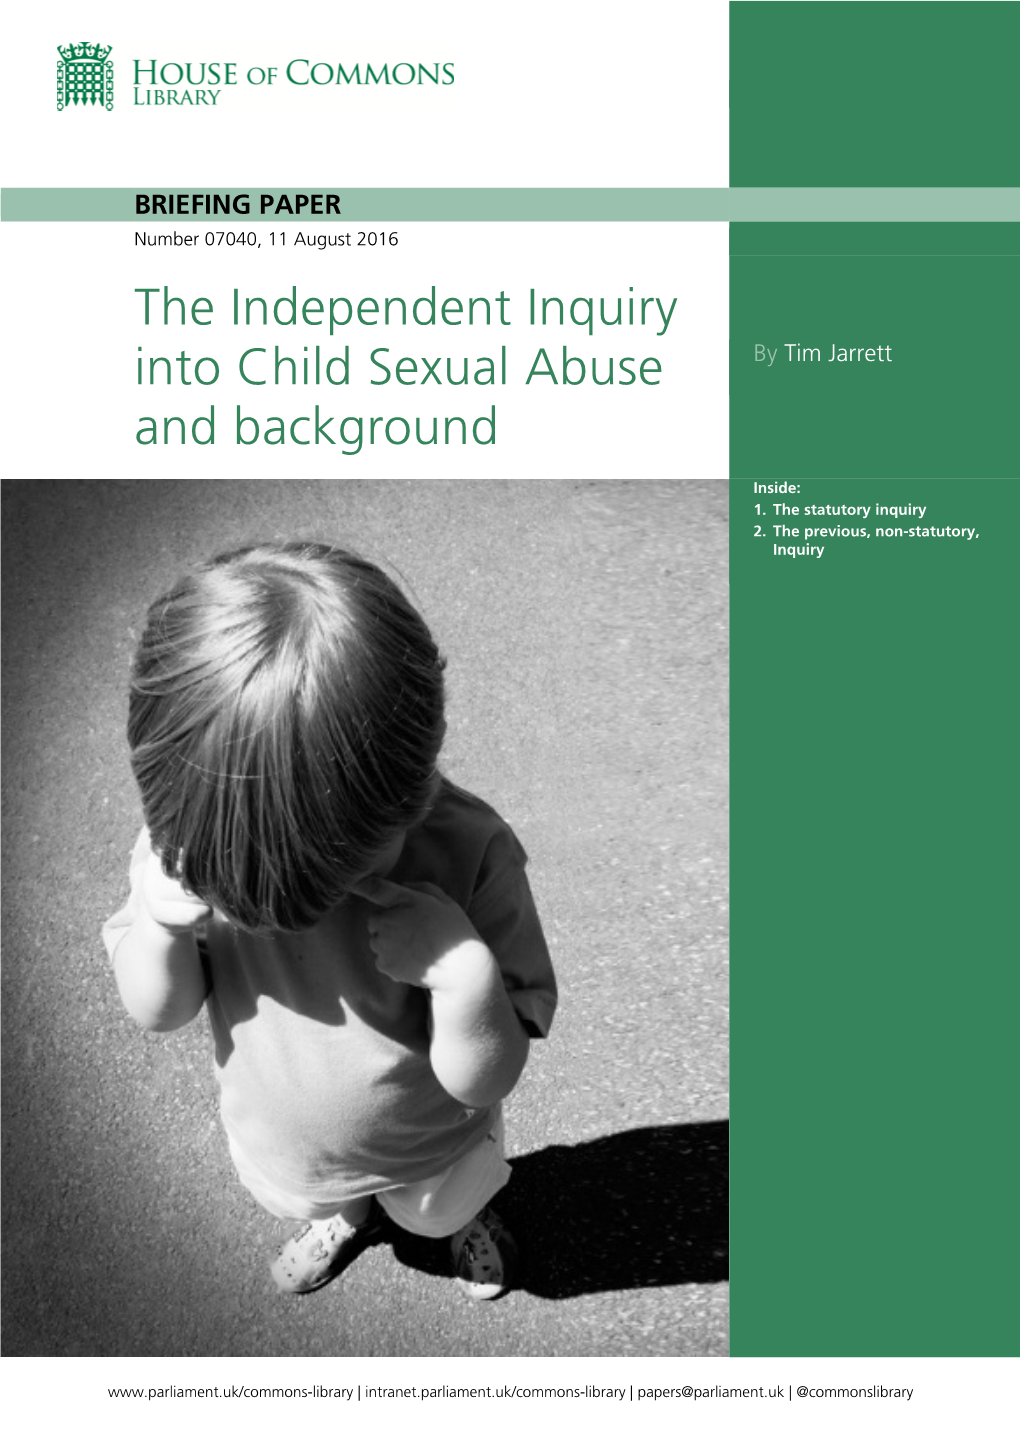 The Independent Inquiry Into Child Sexual Abuse and Background